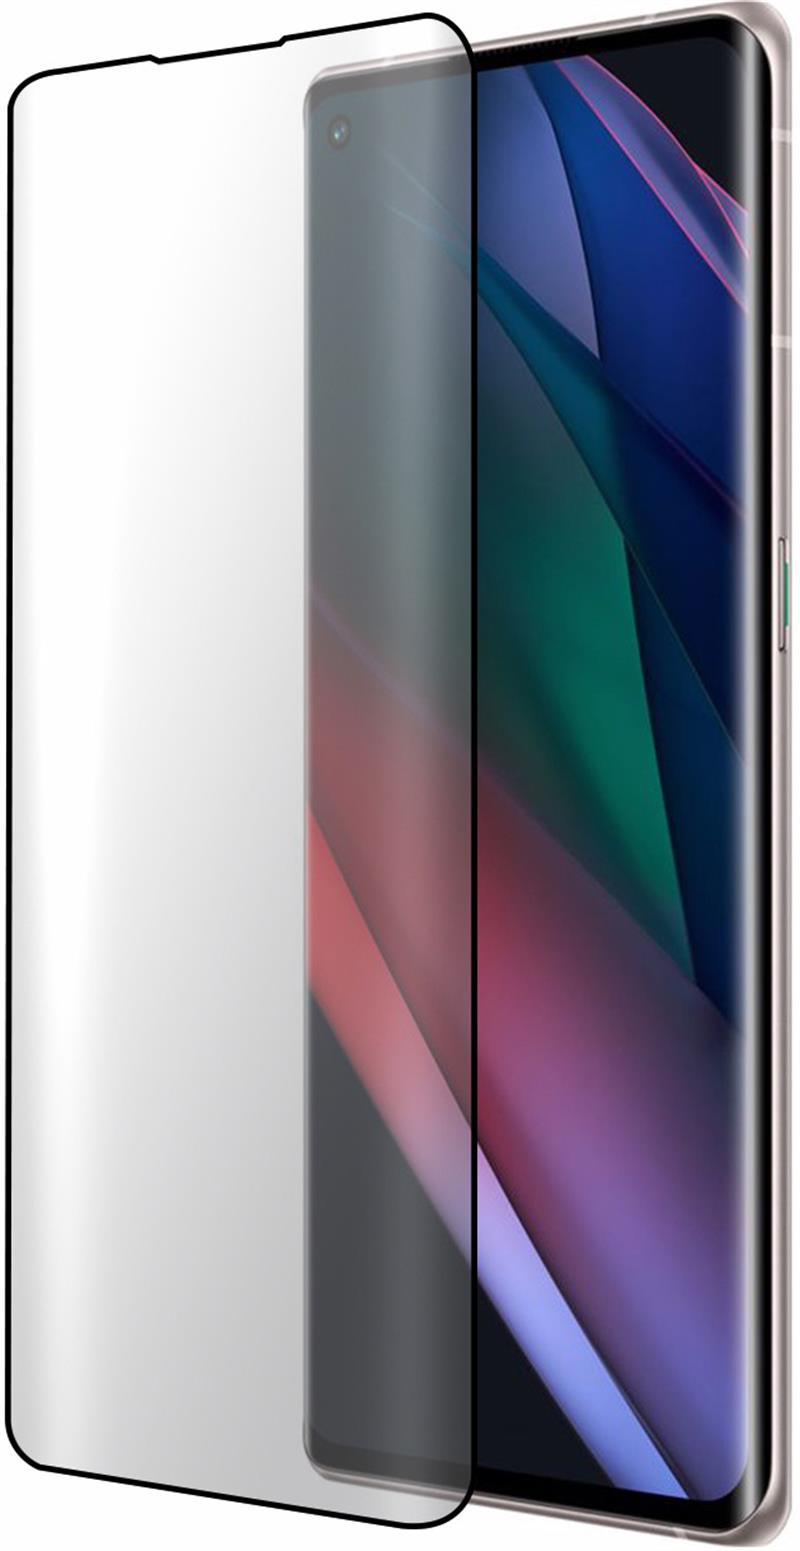 Mobiparts Curved Glass Oppo Find X3 Neo